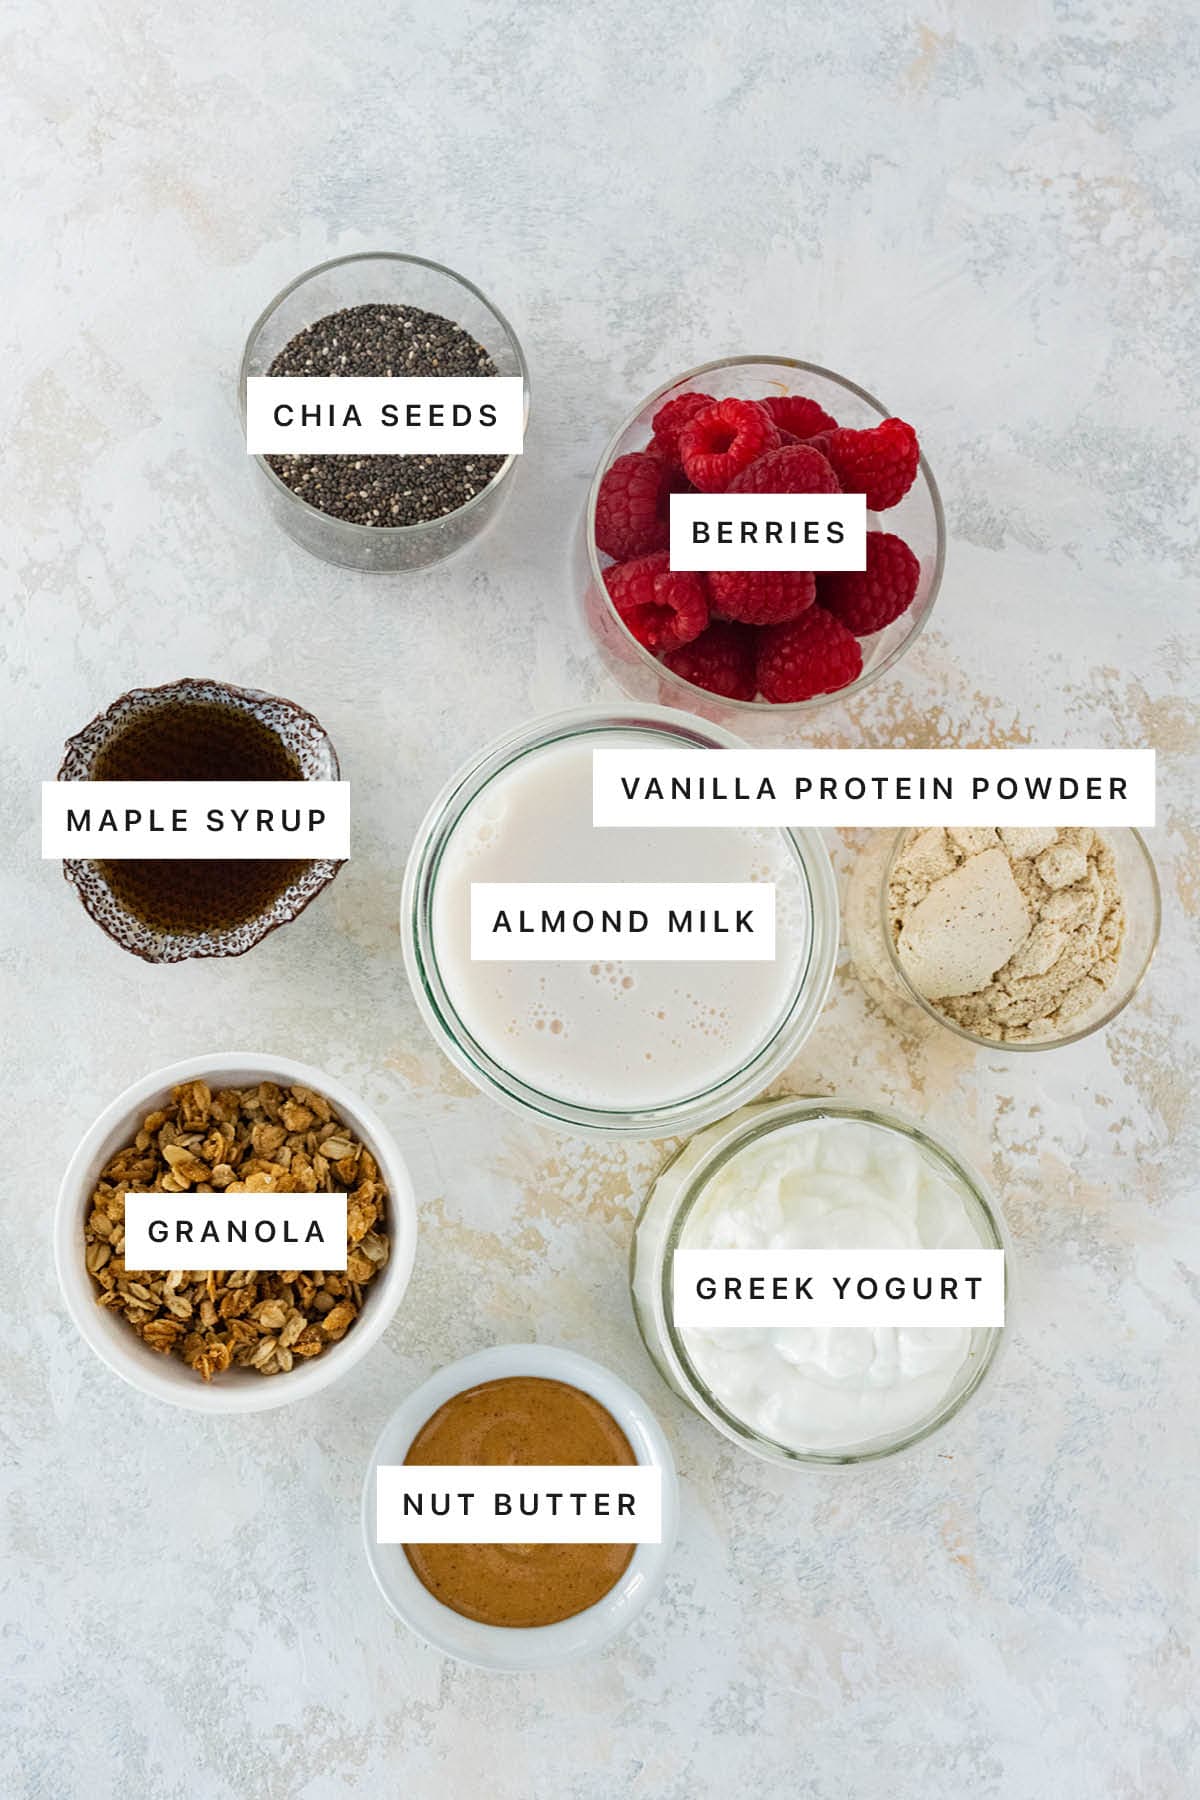 Ingredients measured out to make Protein Chia Pudding: chia seeds, berries, maple syrup, vanilla protein powder, almond milk, granola, Greek yogurt and nut butter.